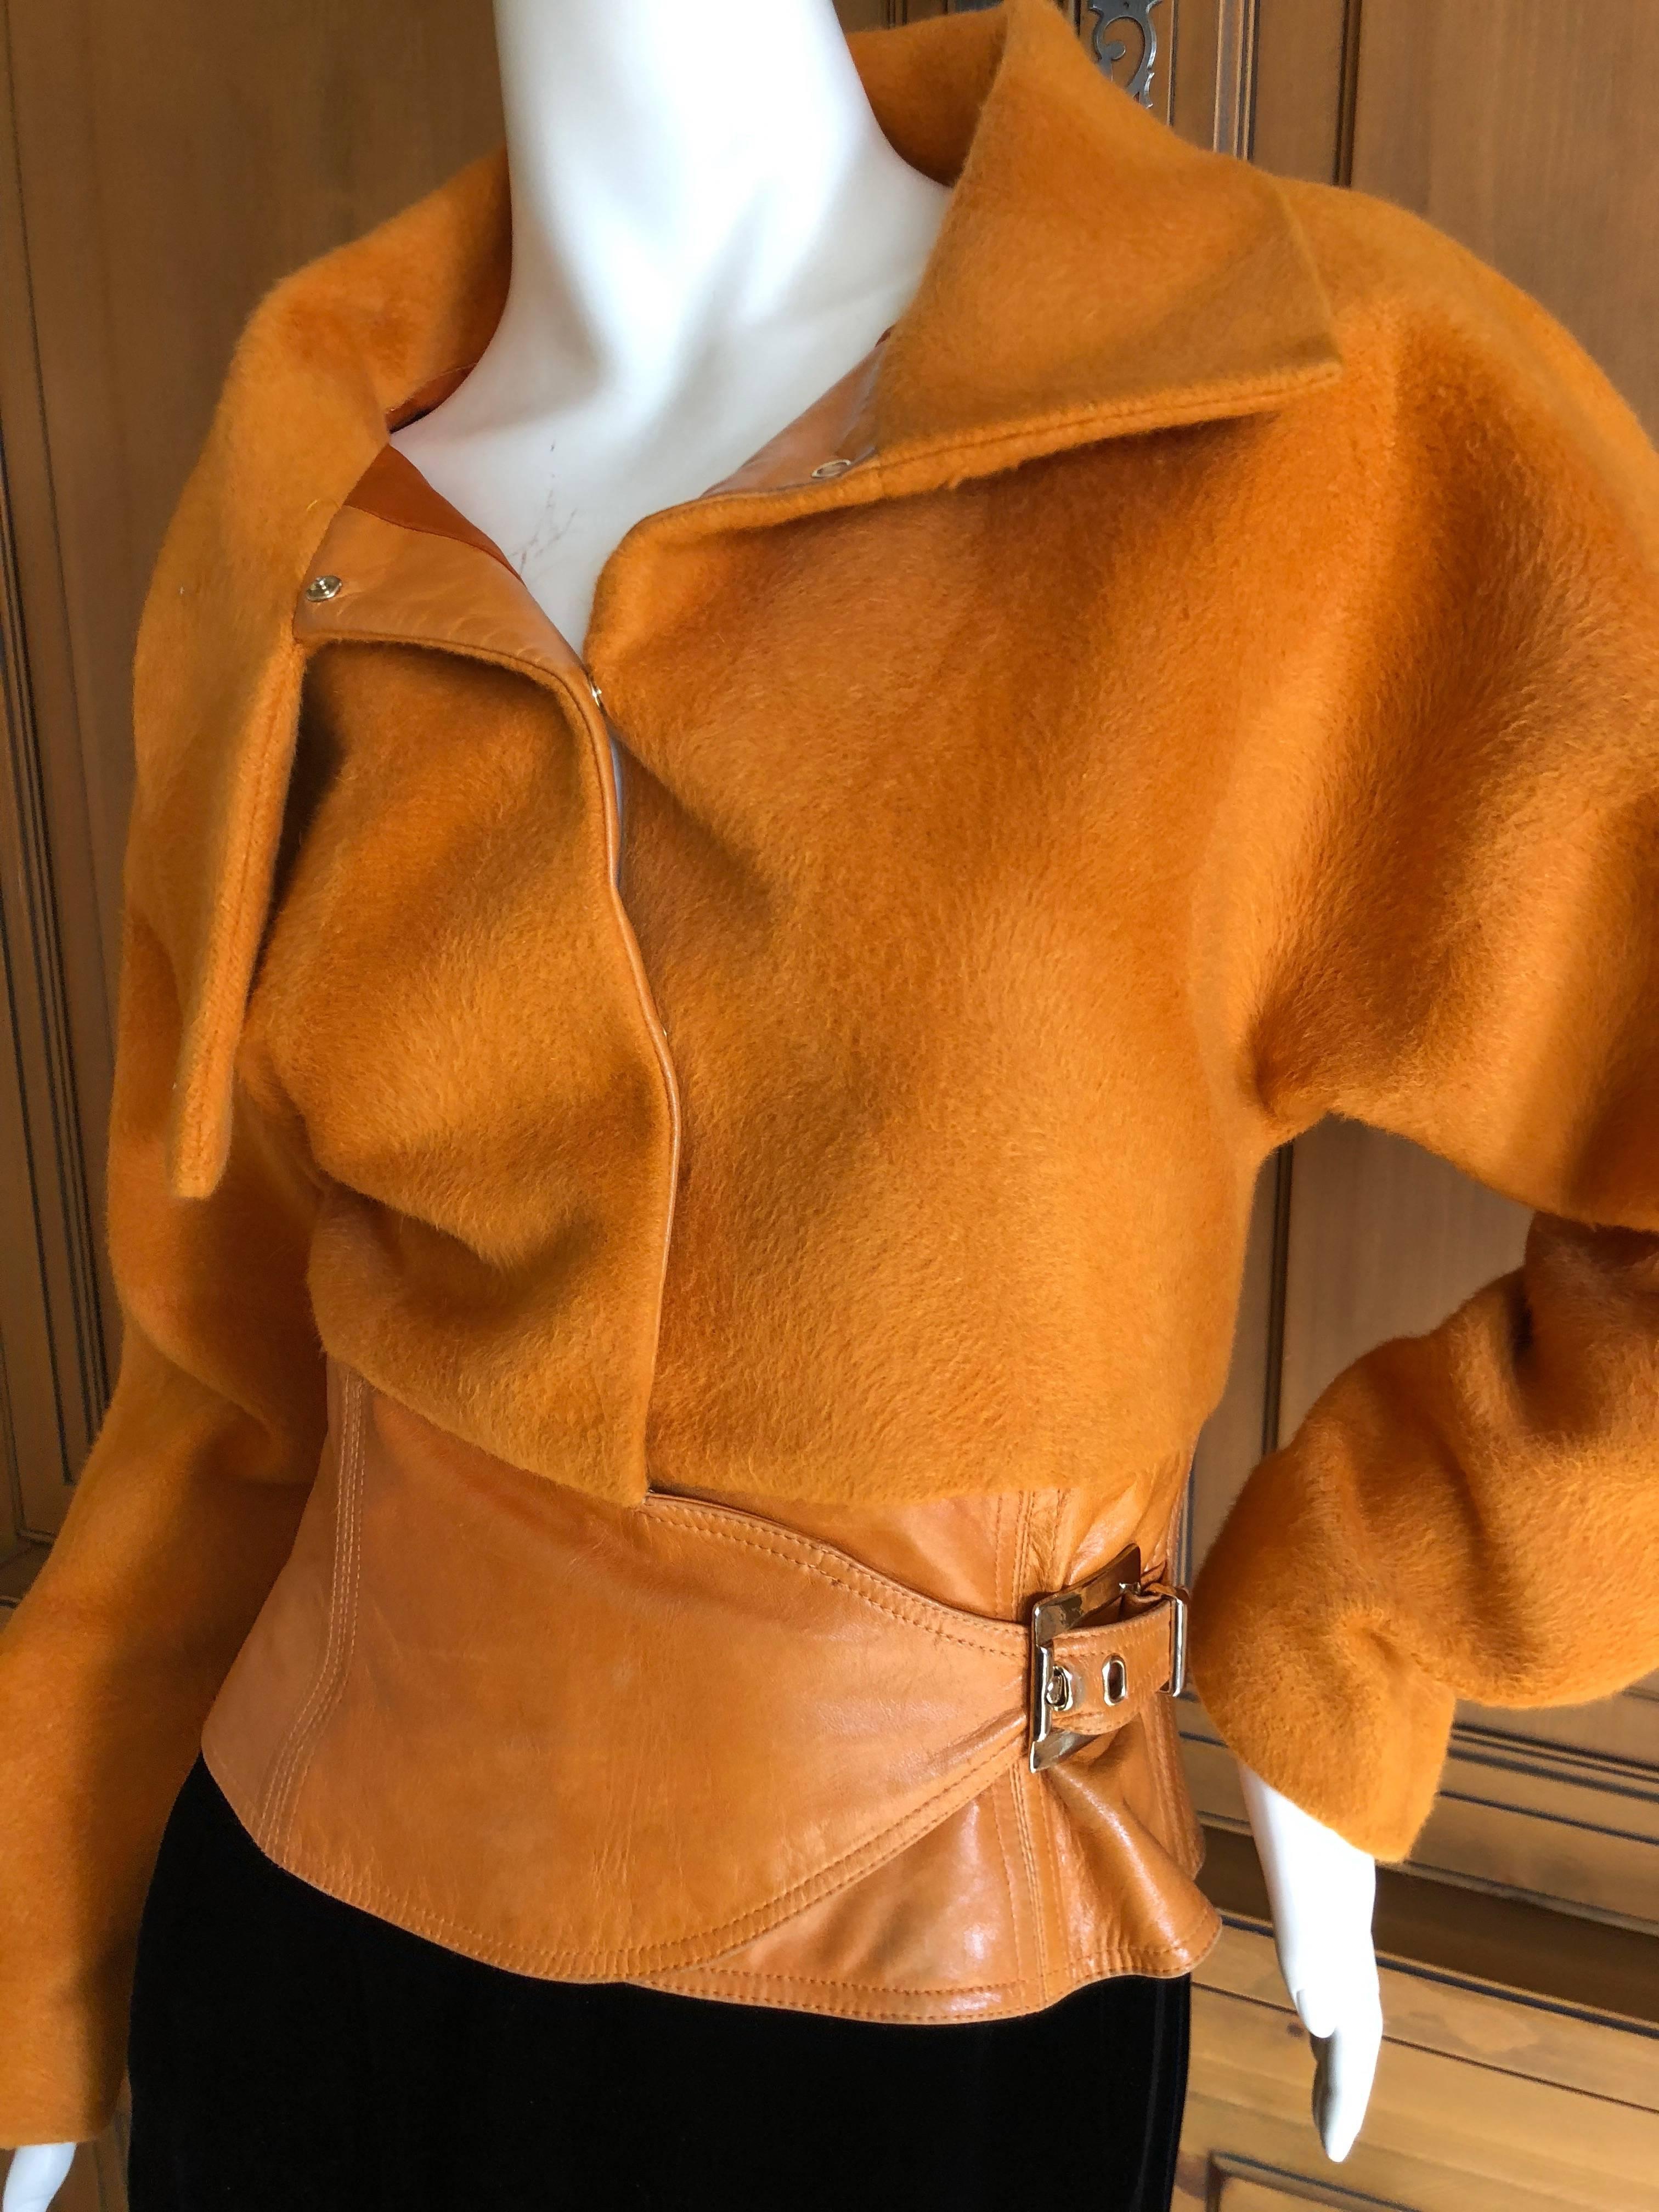 Gianni Versace Couture 1980's Luxurious Orange Wrap Jacket with Leather Trim In Excellent Condition For Sale In Cloverdale, CA